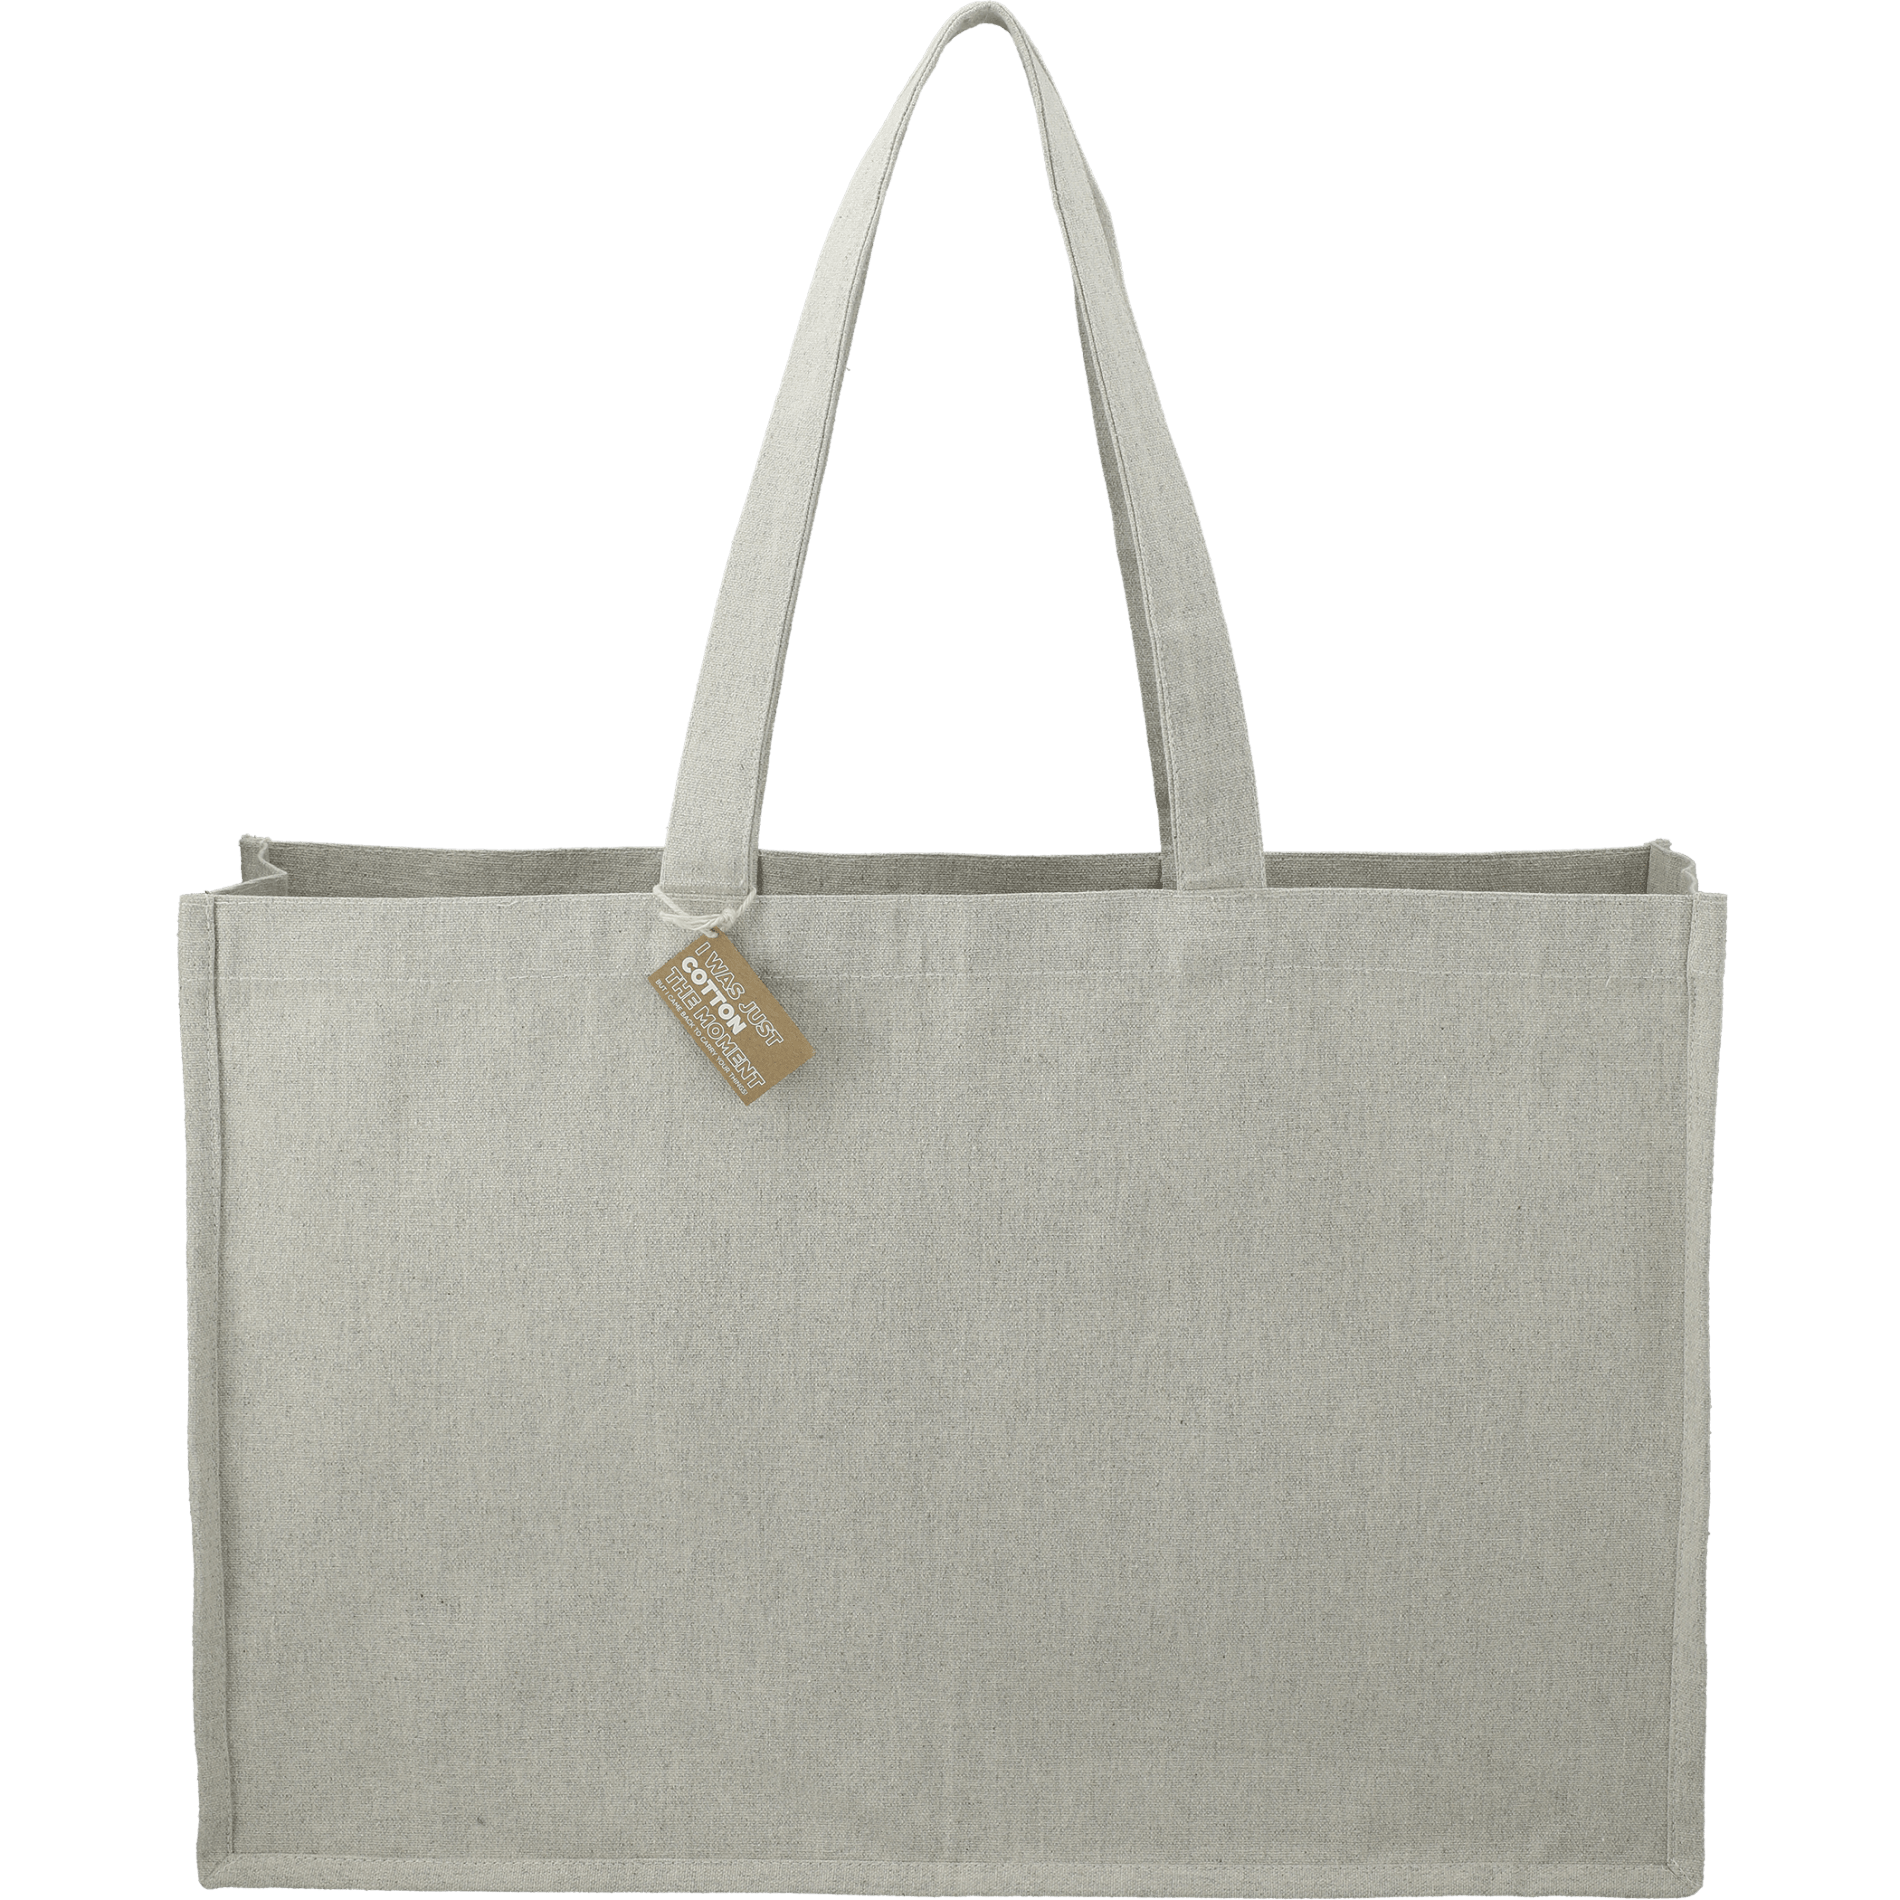 LEEDS 7901-12 - Repose 10oz Recycled Cotton Shoulder Tote